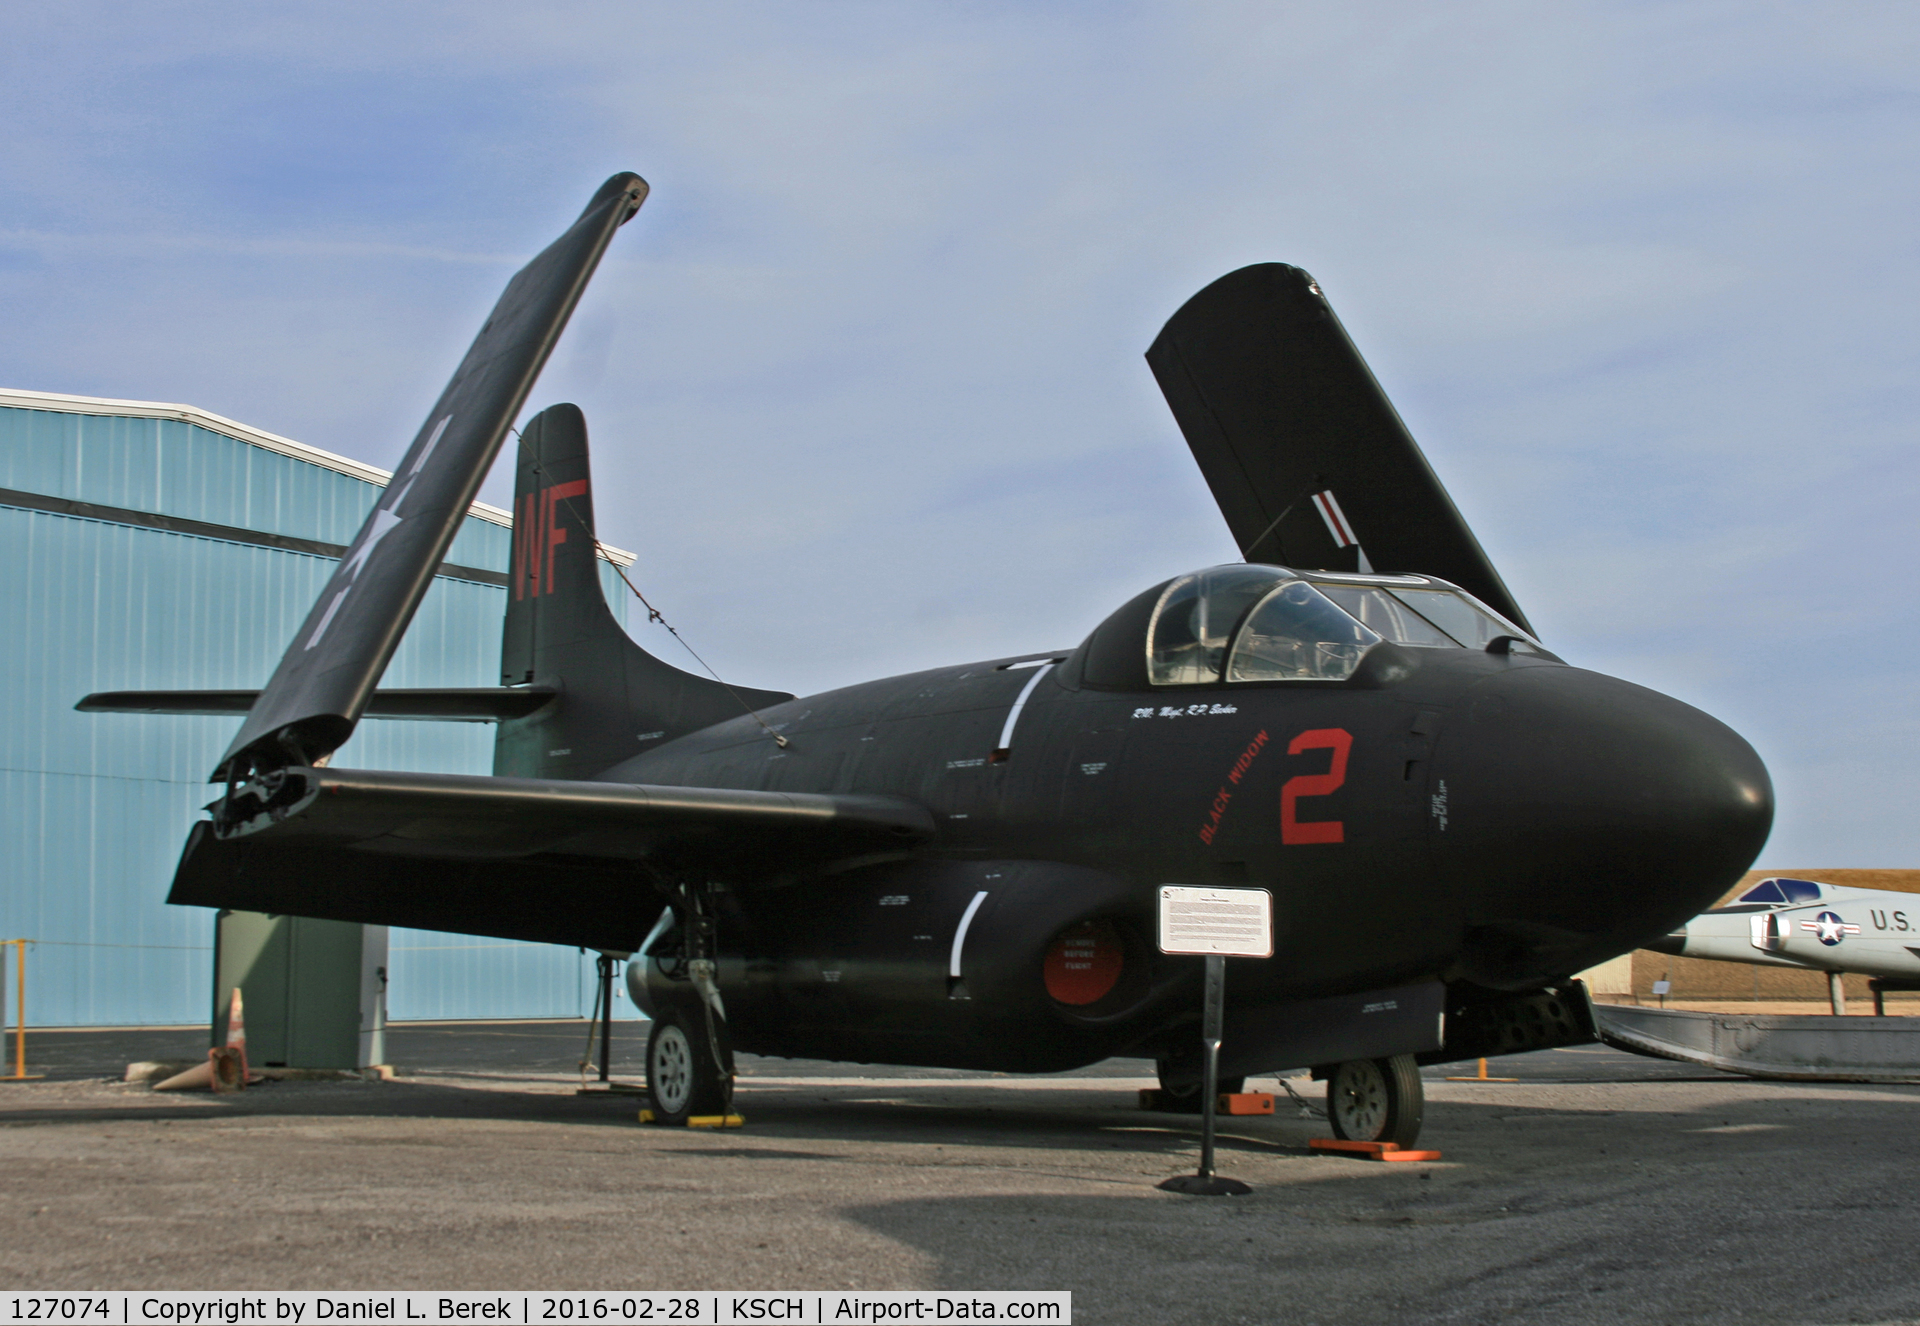 127074, Douglas F3D-2 Skyknight C/N 8132, Formerly displayed on the USS Intrepid, this aircraft has been transferred to the Empire State Aerosciences Museum and restored.